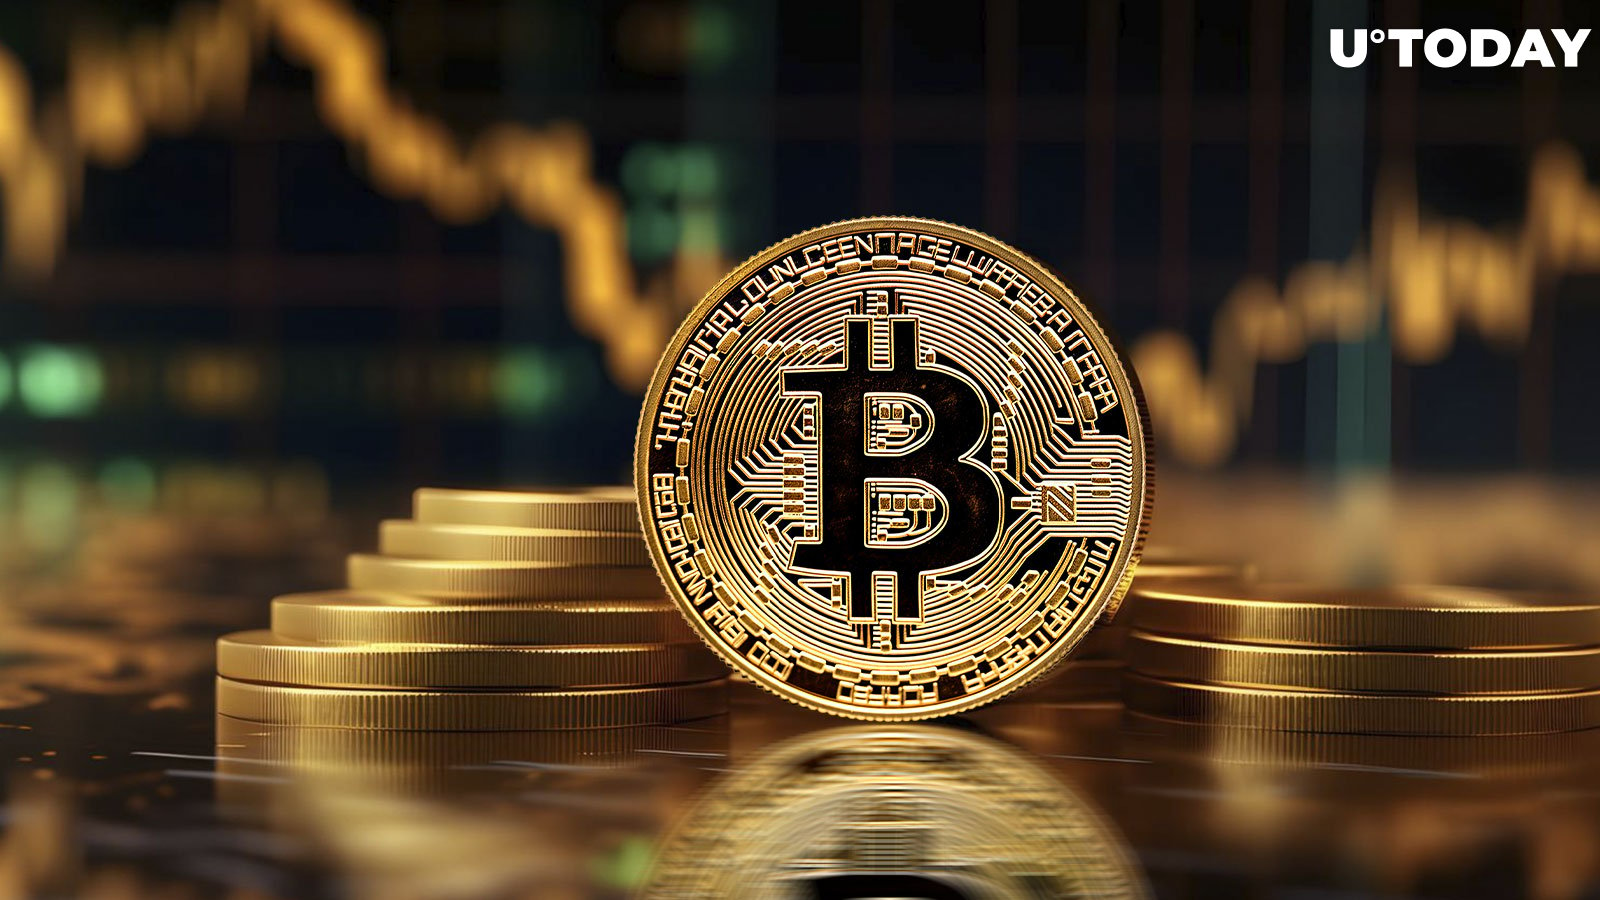 Bitcoin (BTC) Reclaims $60,000 as Crucial Metric Points to Price Rebound